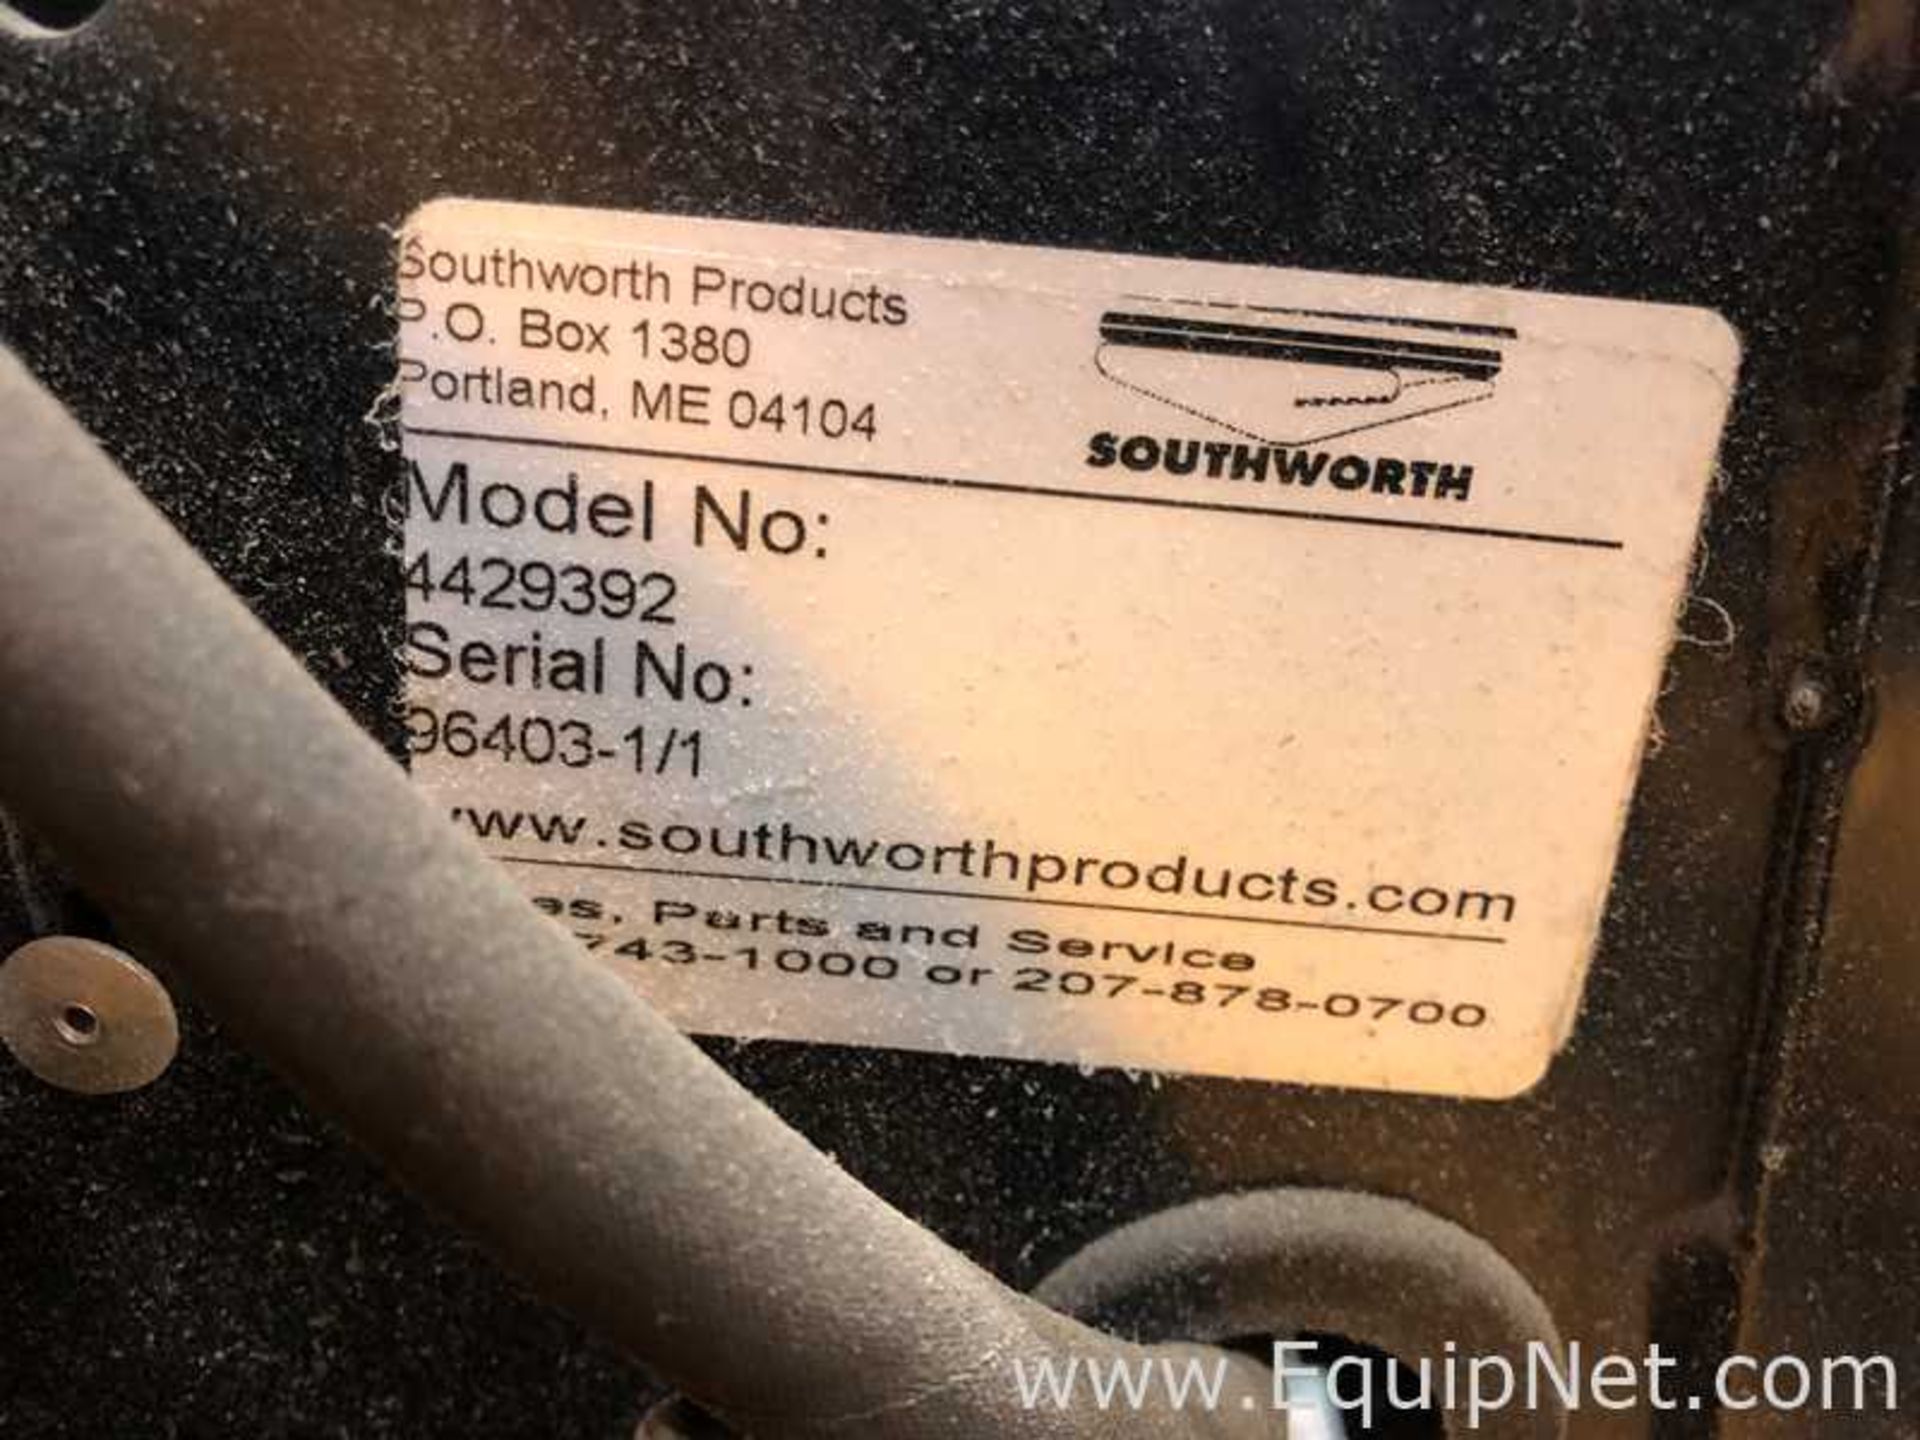 Lot of Seven Southworth Products 4429392 Pallet Jack - Pallet Lifters - Image 6 of 8